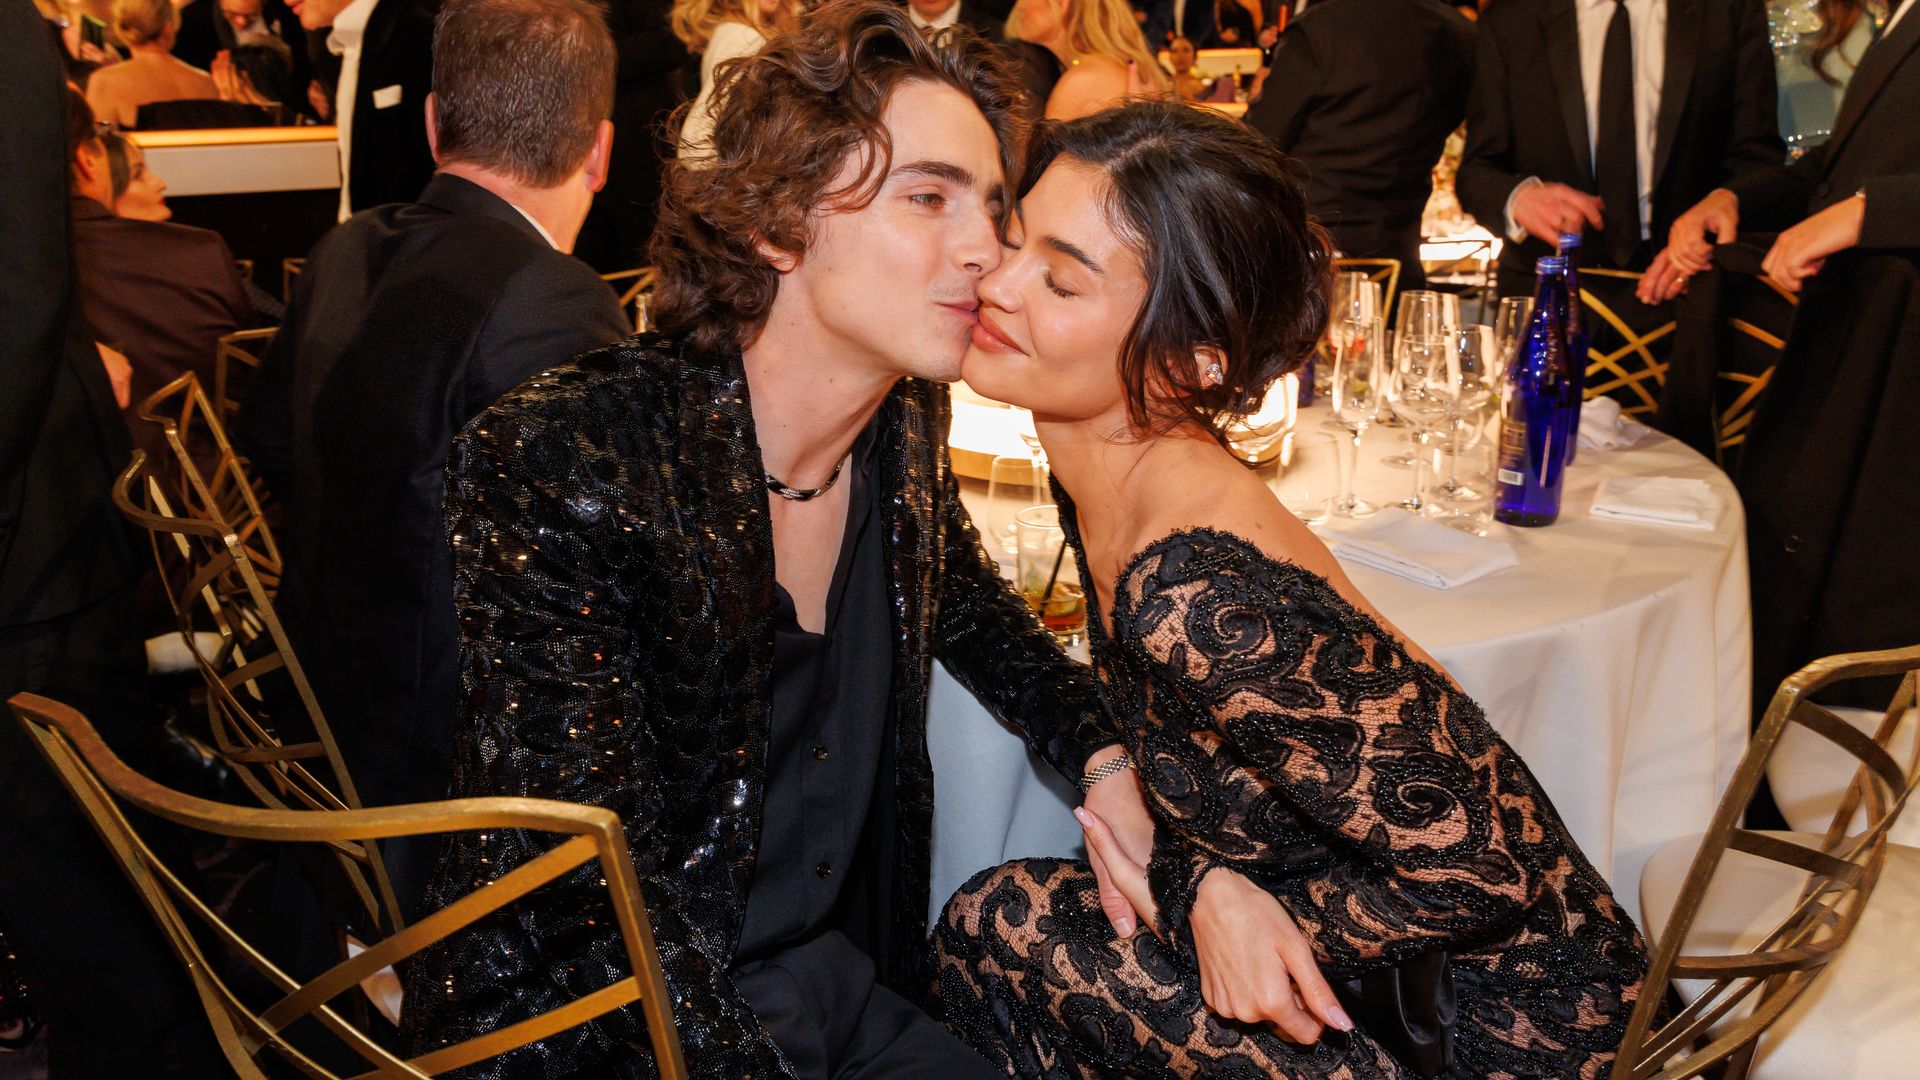 Kylie and Timothee made their public debut at the Golden Globes 